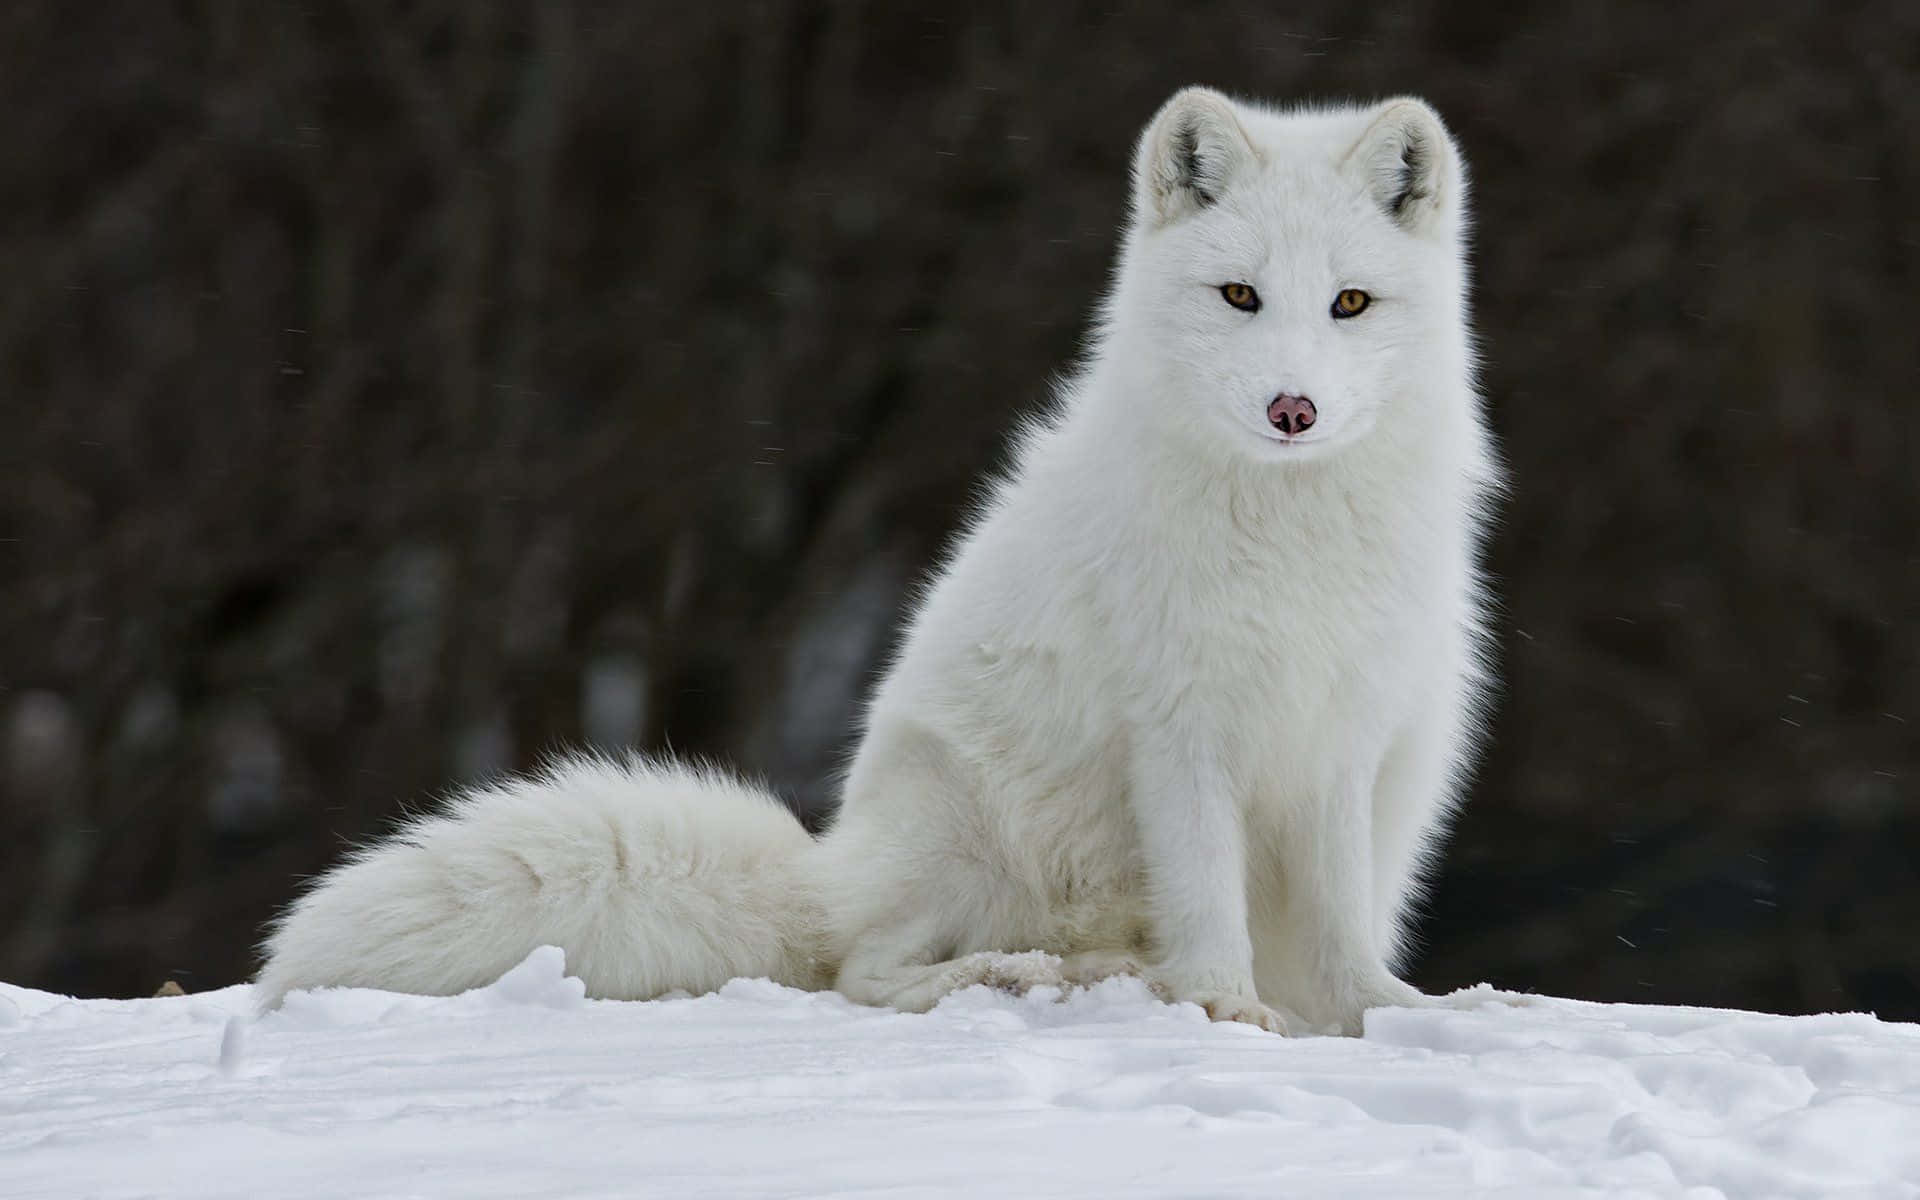 A close-up of an Arctic Fox's beautiful white fur